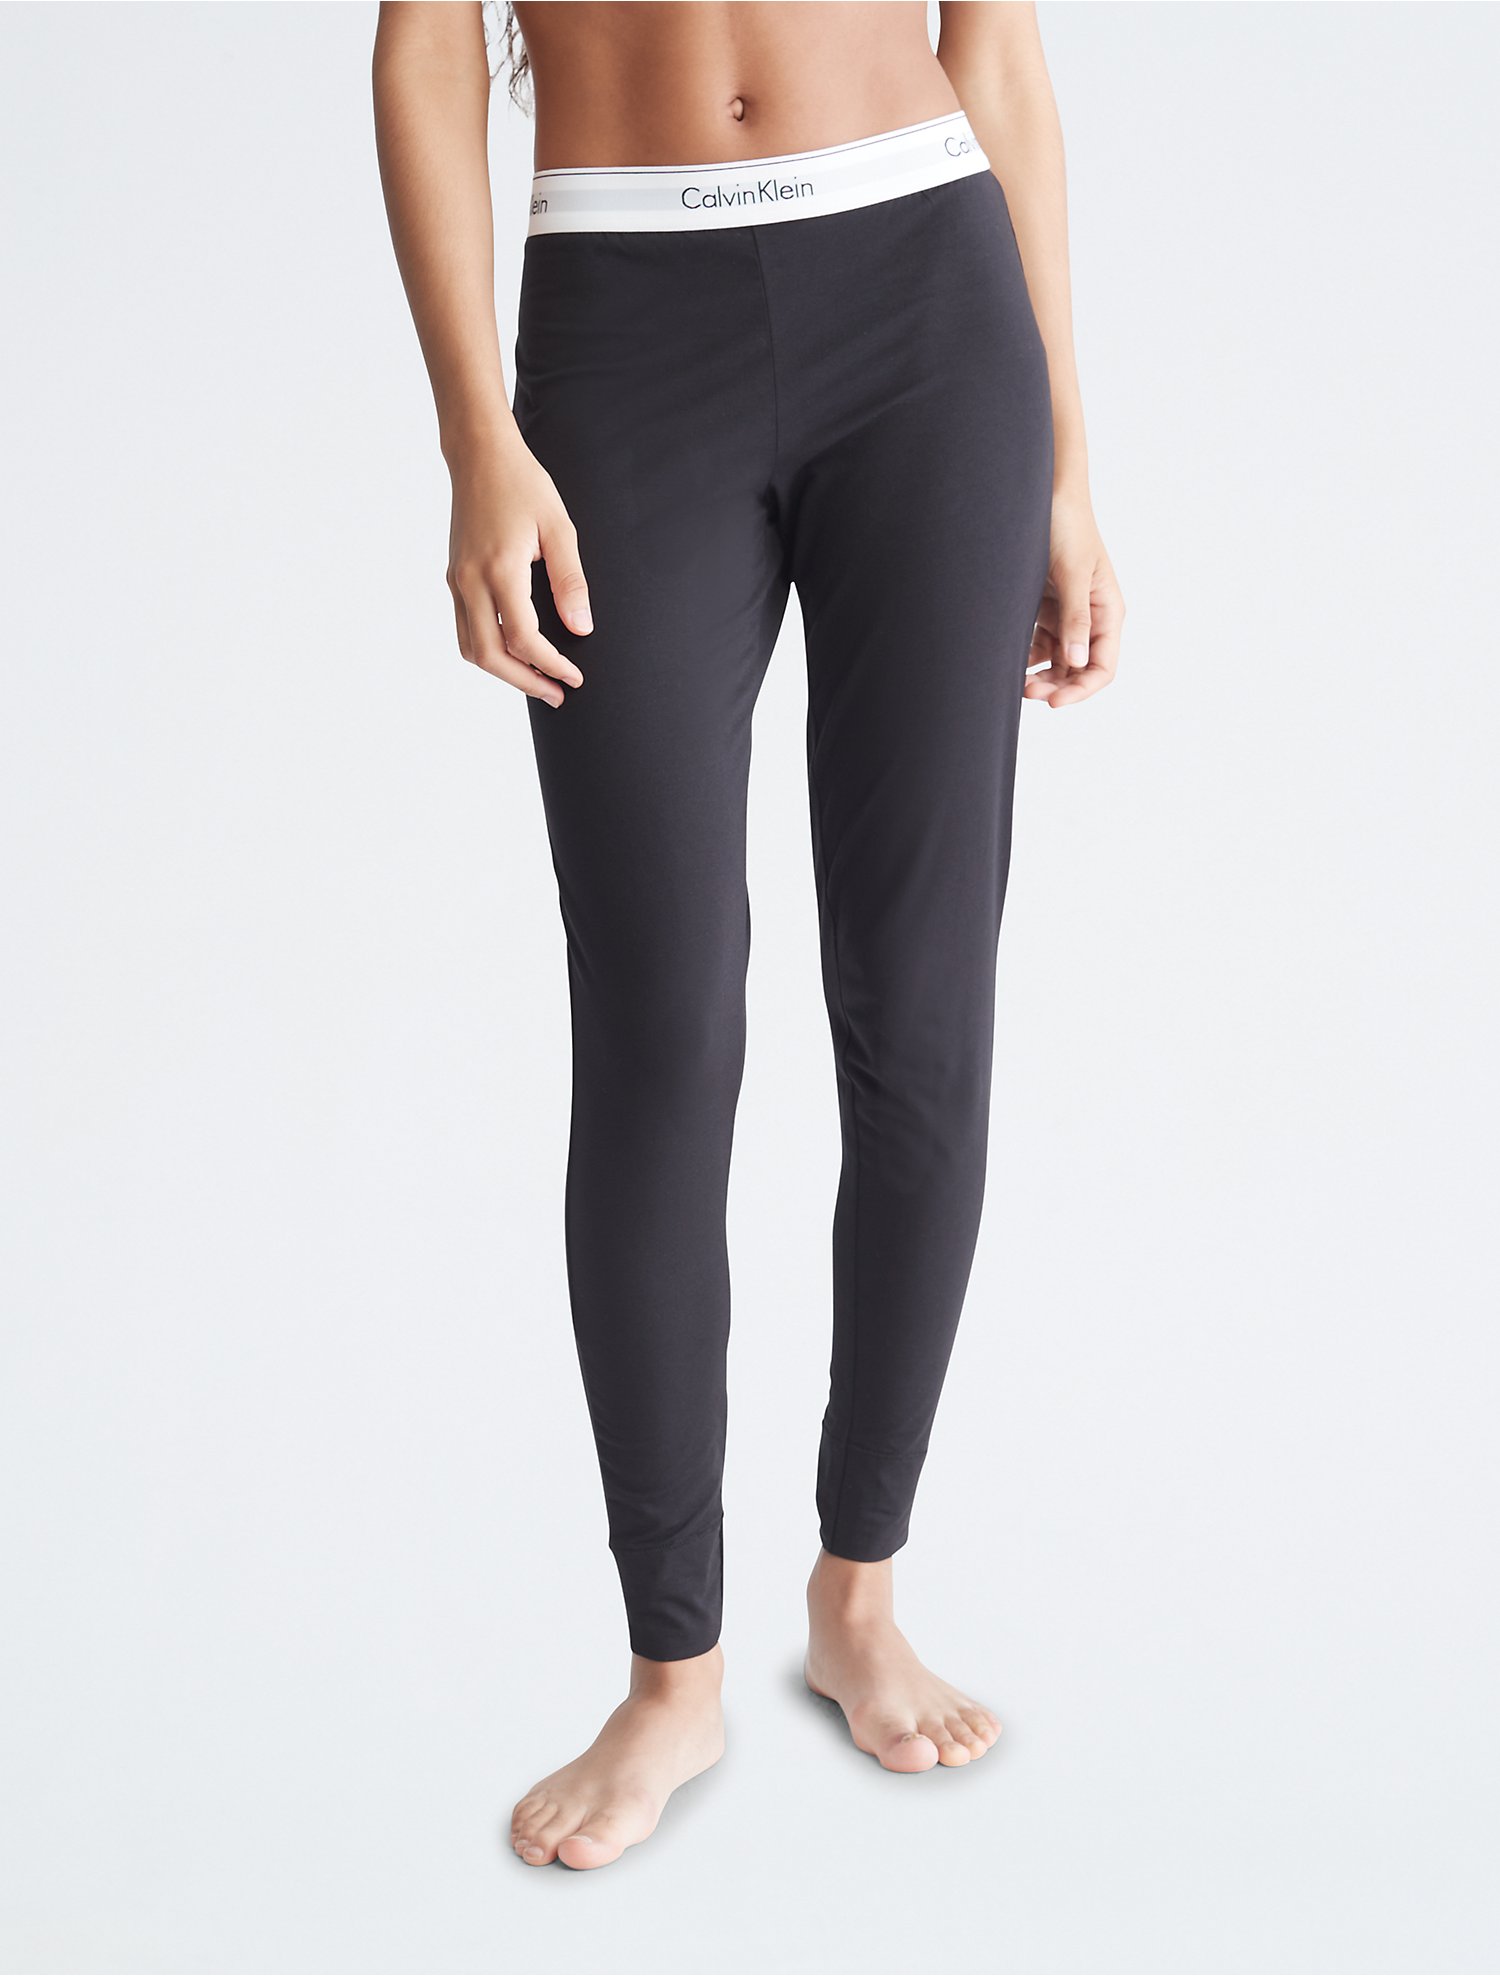 Slacks and Chinos Leggings Calvin Klein Cotton Stretch Gym Leggings in Black Womens Clothing Trousers 